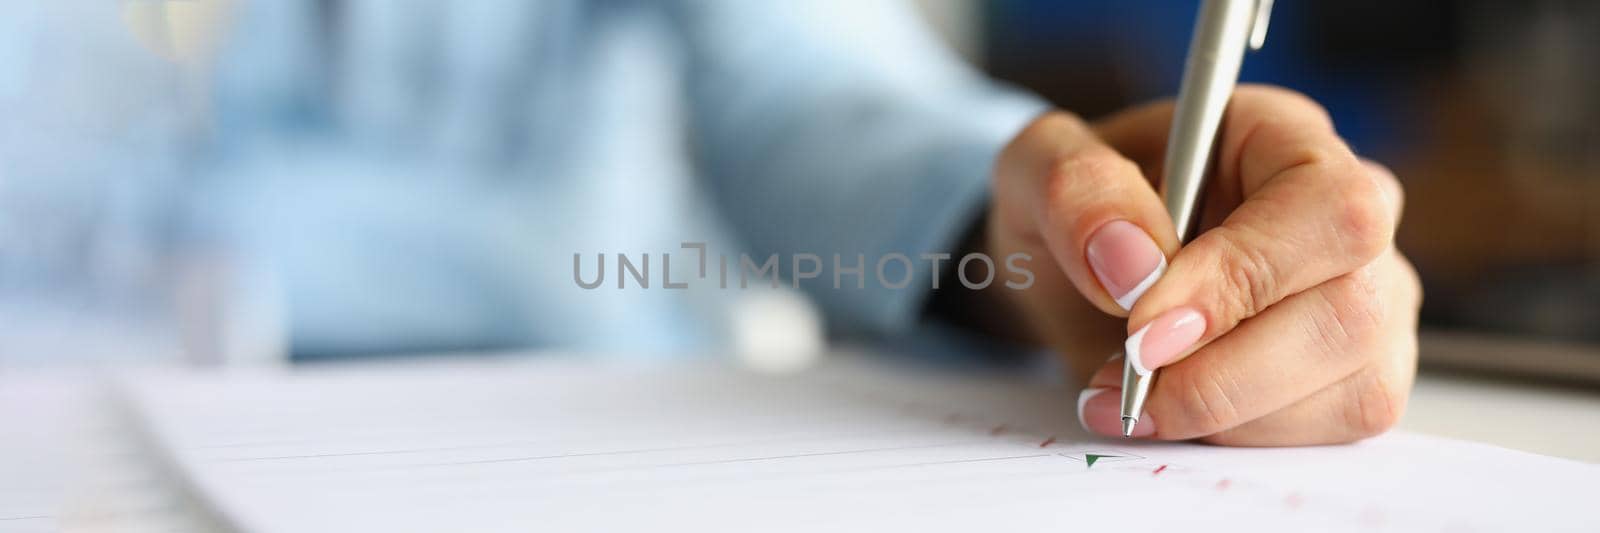 Close-up of female hand holding pen and putting green check on white paper. Application form for personal information. Red crosses and black lines on sheet. Hiring concept. Blurred background